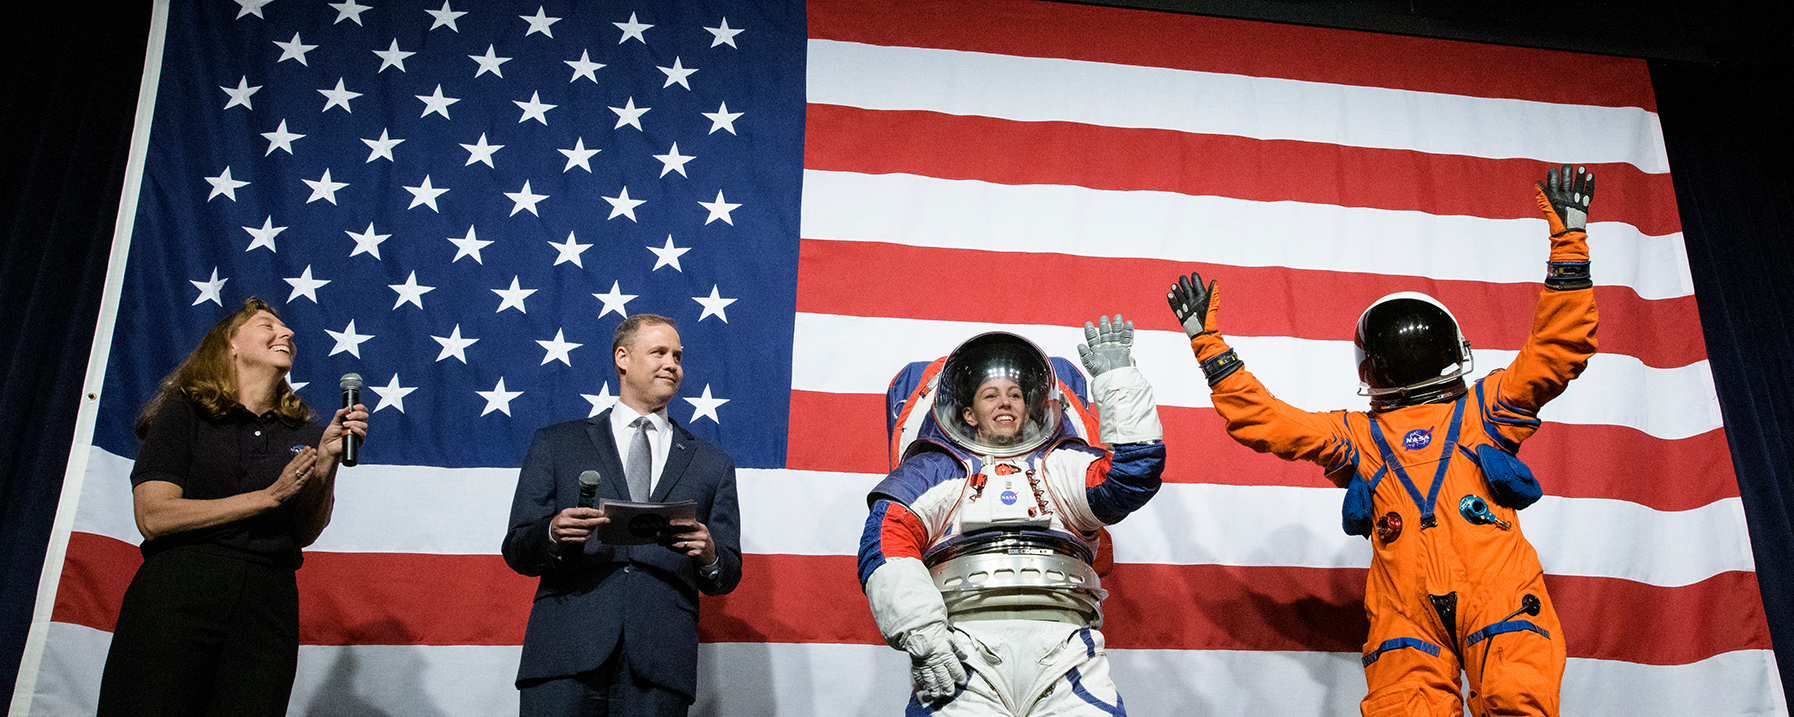 Four people in front of American flag, 2 in space suits